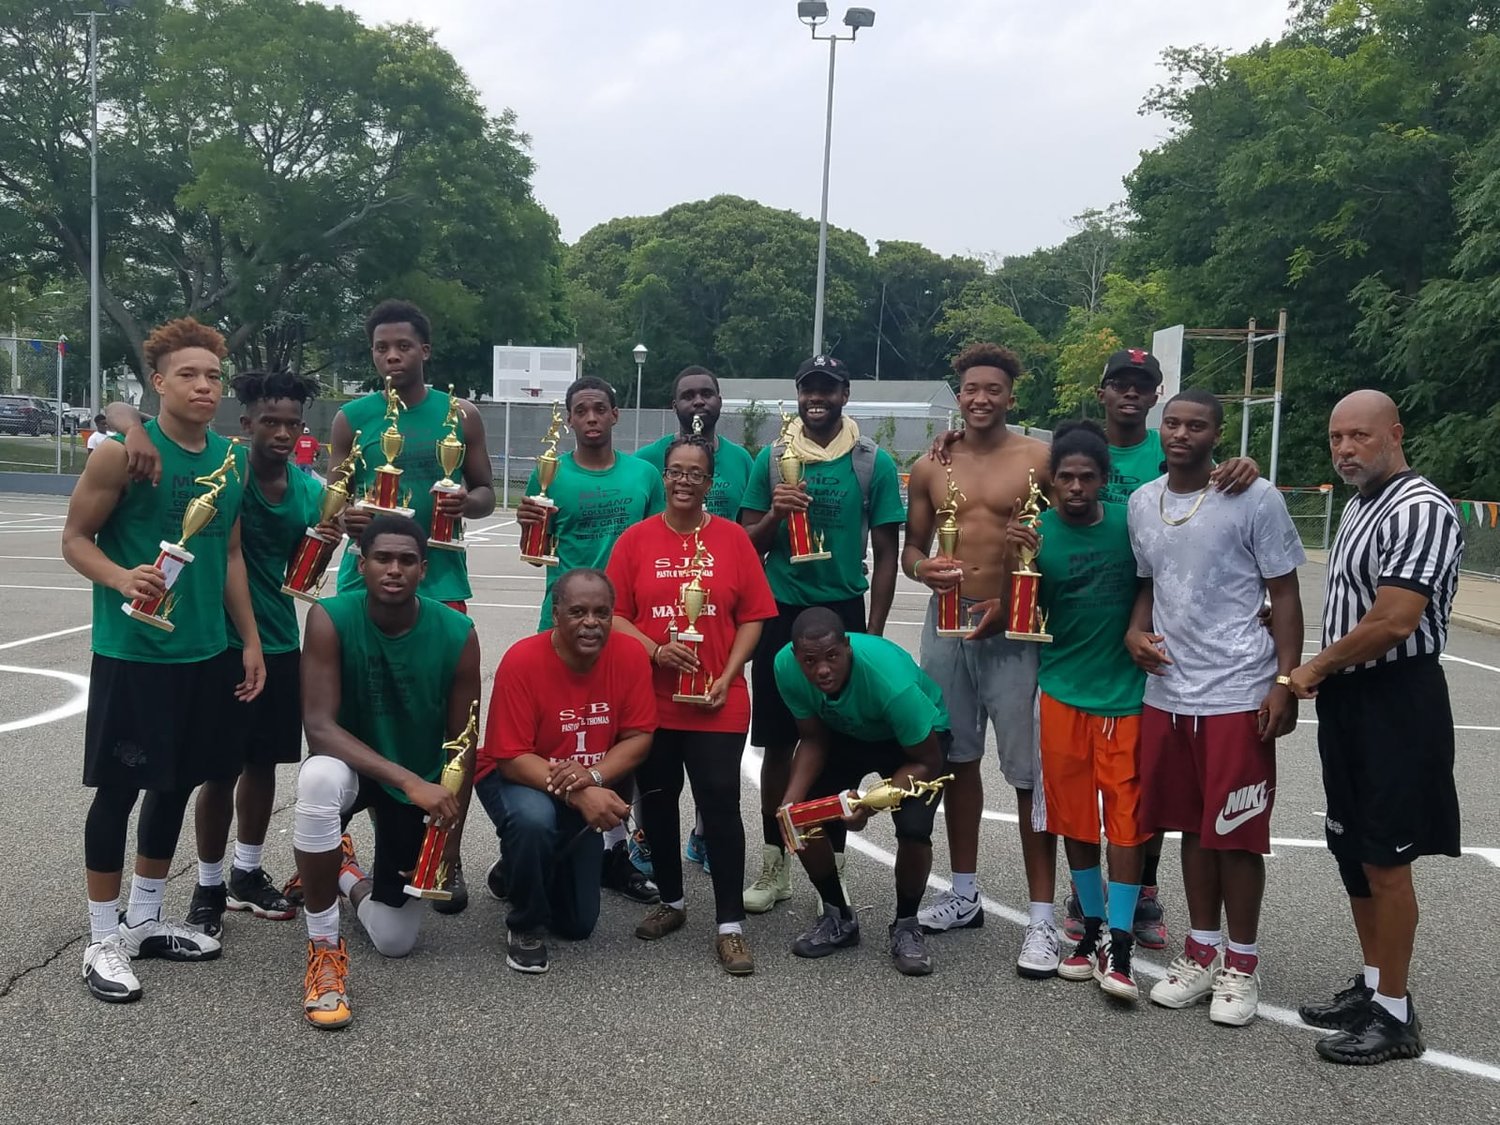 A winning team from the Lakeview Day basketball tournament at Harold Walker Park.